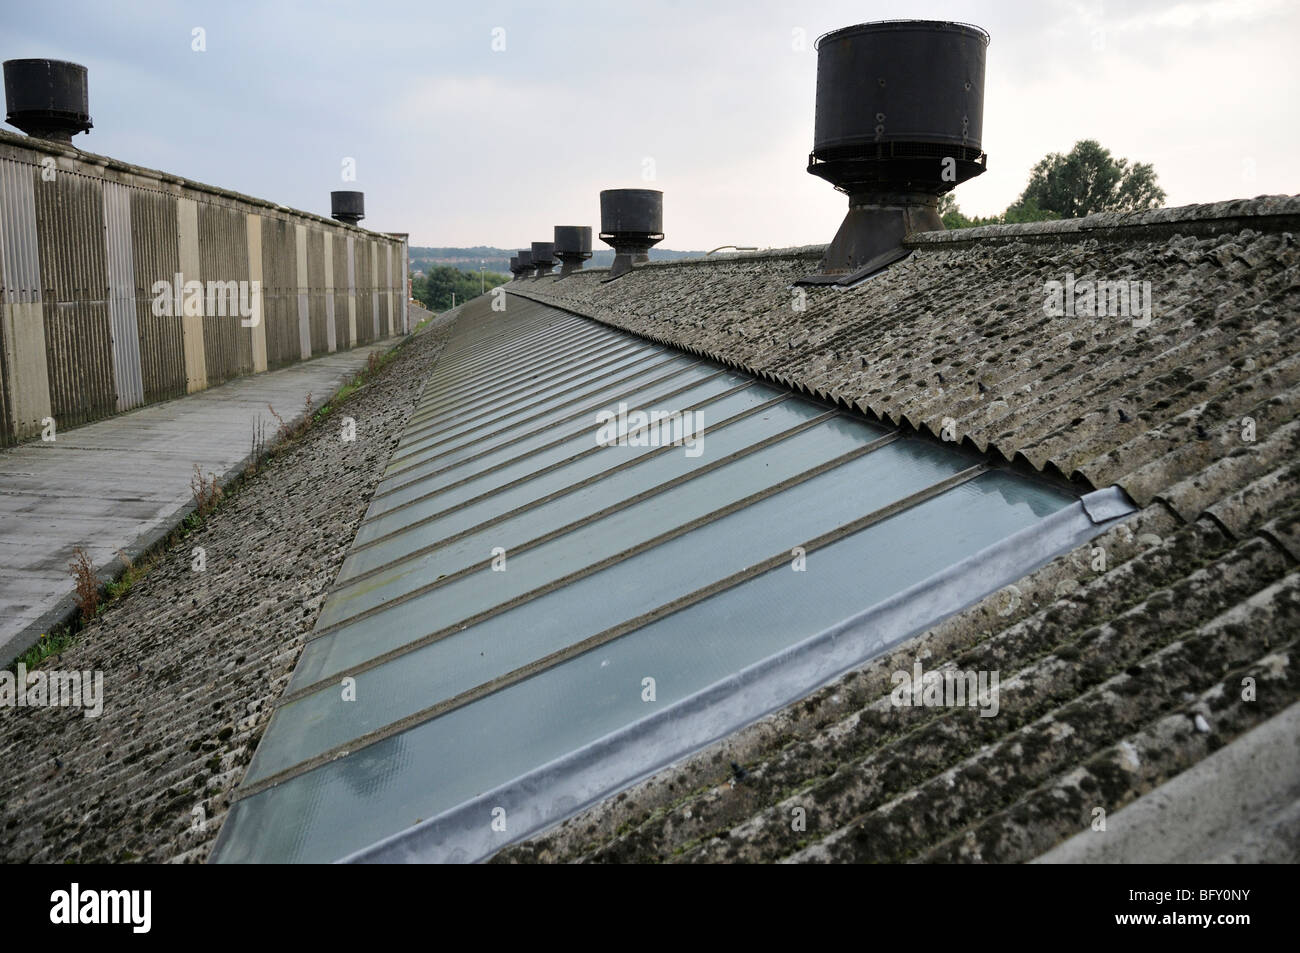 Long factory roof made of asbestos cement sheeting showing roof vents